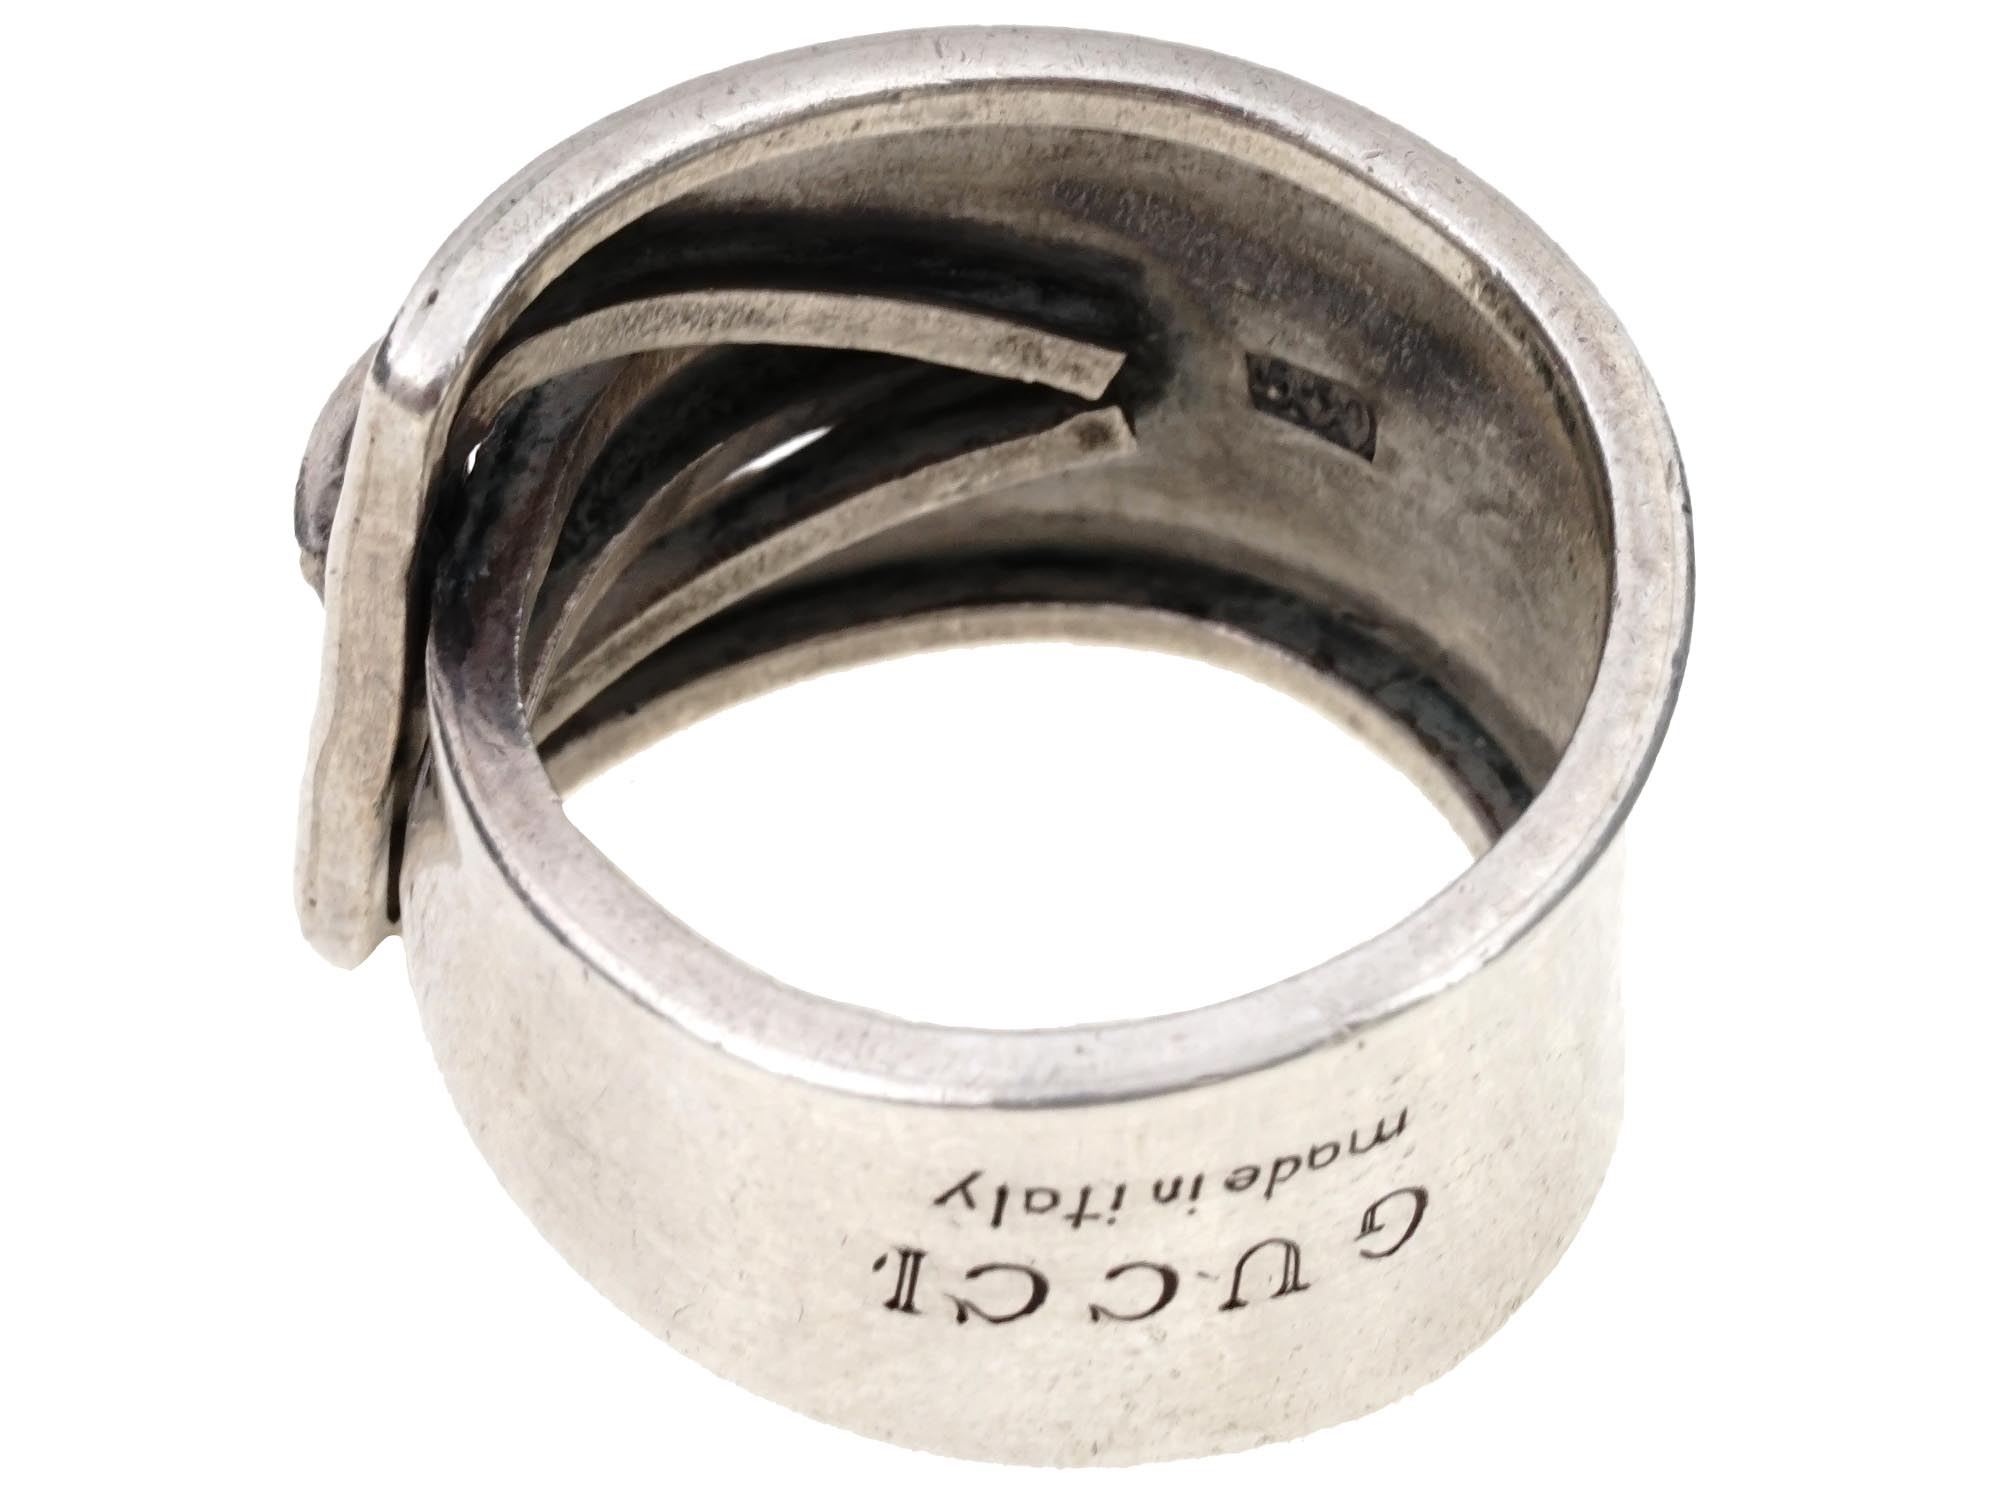 GUCCI ITALY STERLING SILVER WIDE BAND BUCKLE RING PIC-4